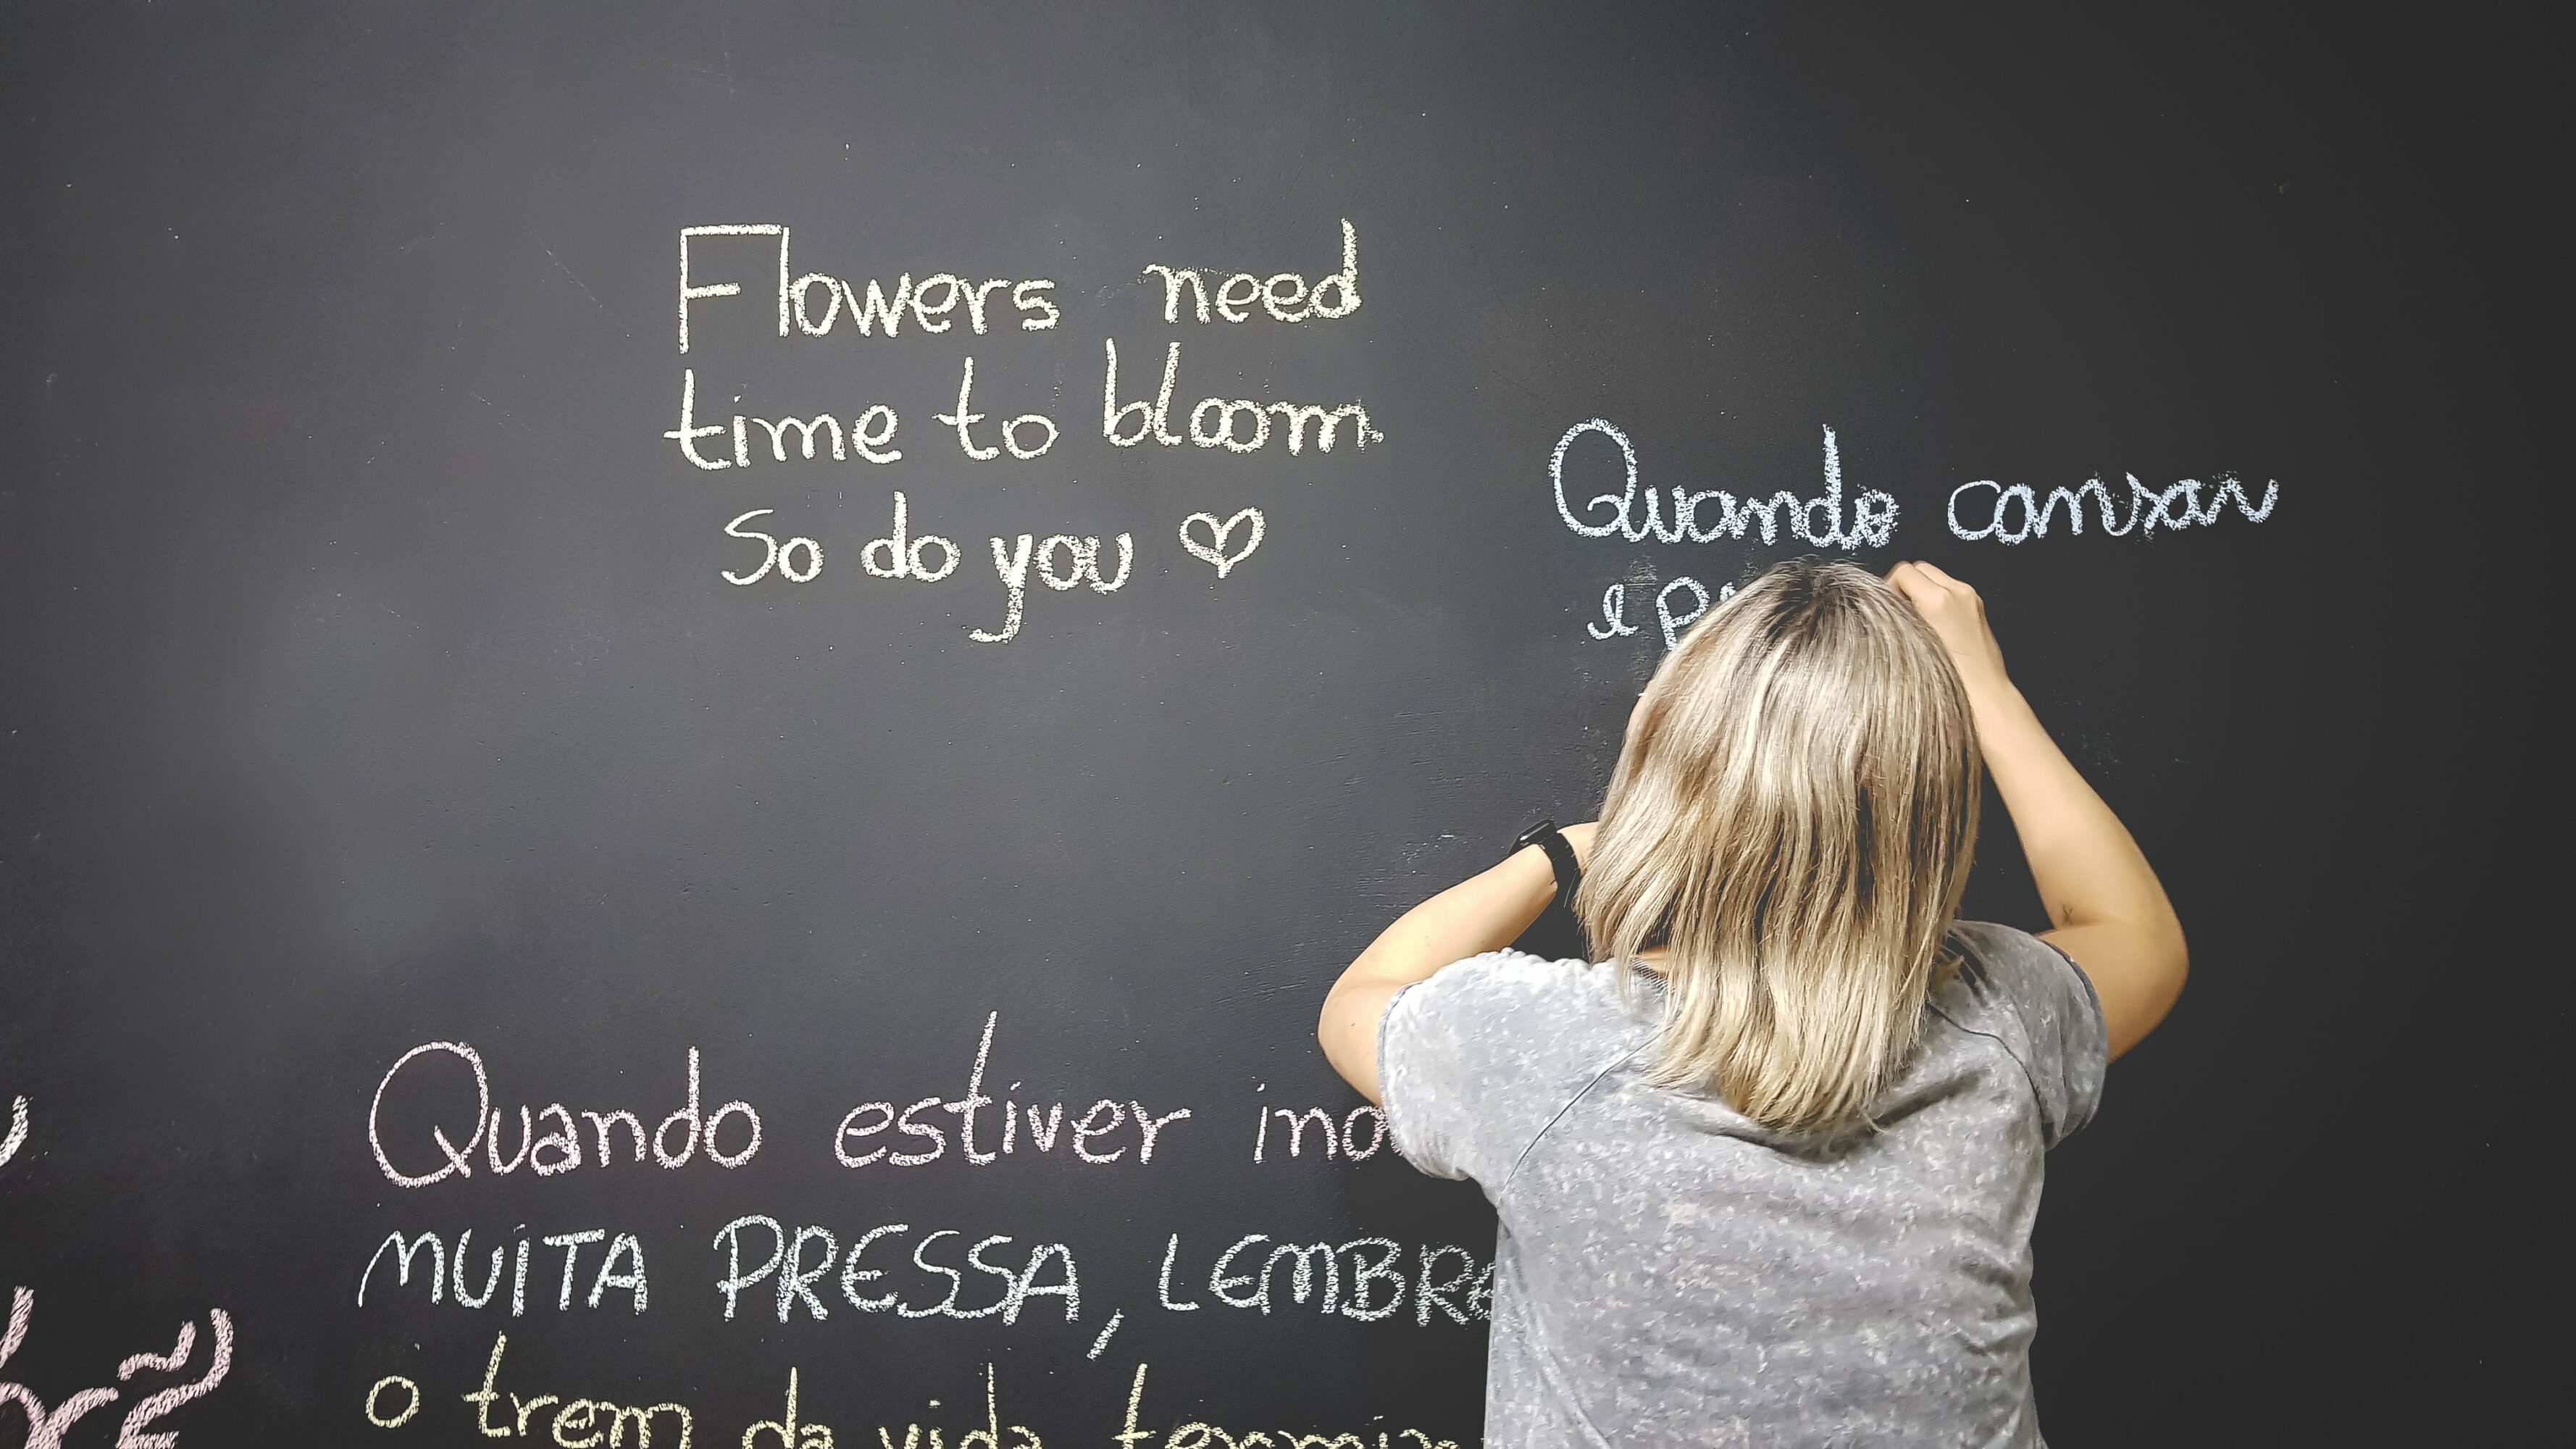 An adult writing on a chalkboard. One sentiment says "Flowers need time to bloom. So do you.